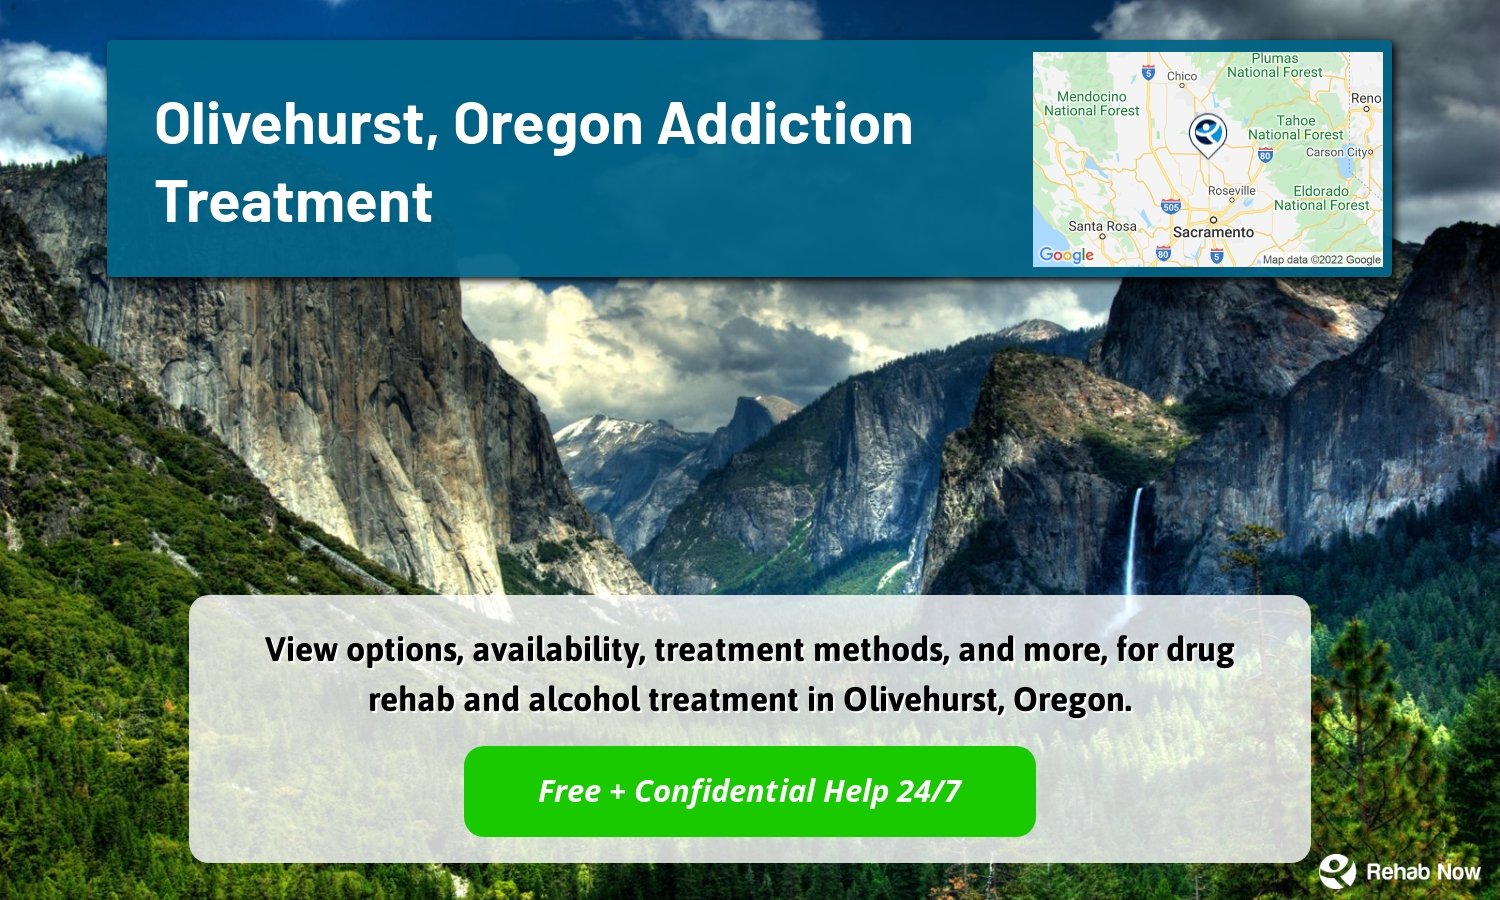 View options, availability, treatment methods, and more, for drug rehab and alcohol treatment in Olivehurst, Oregon.